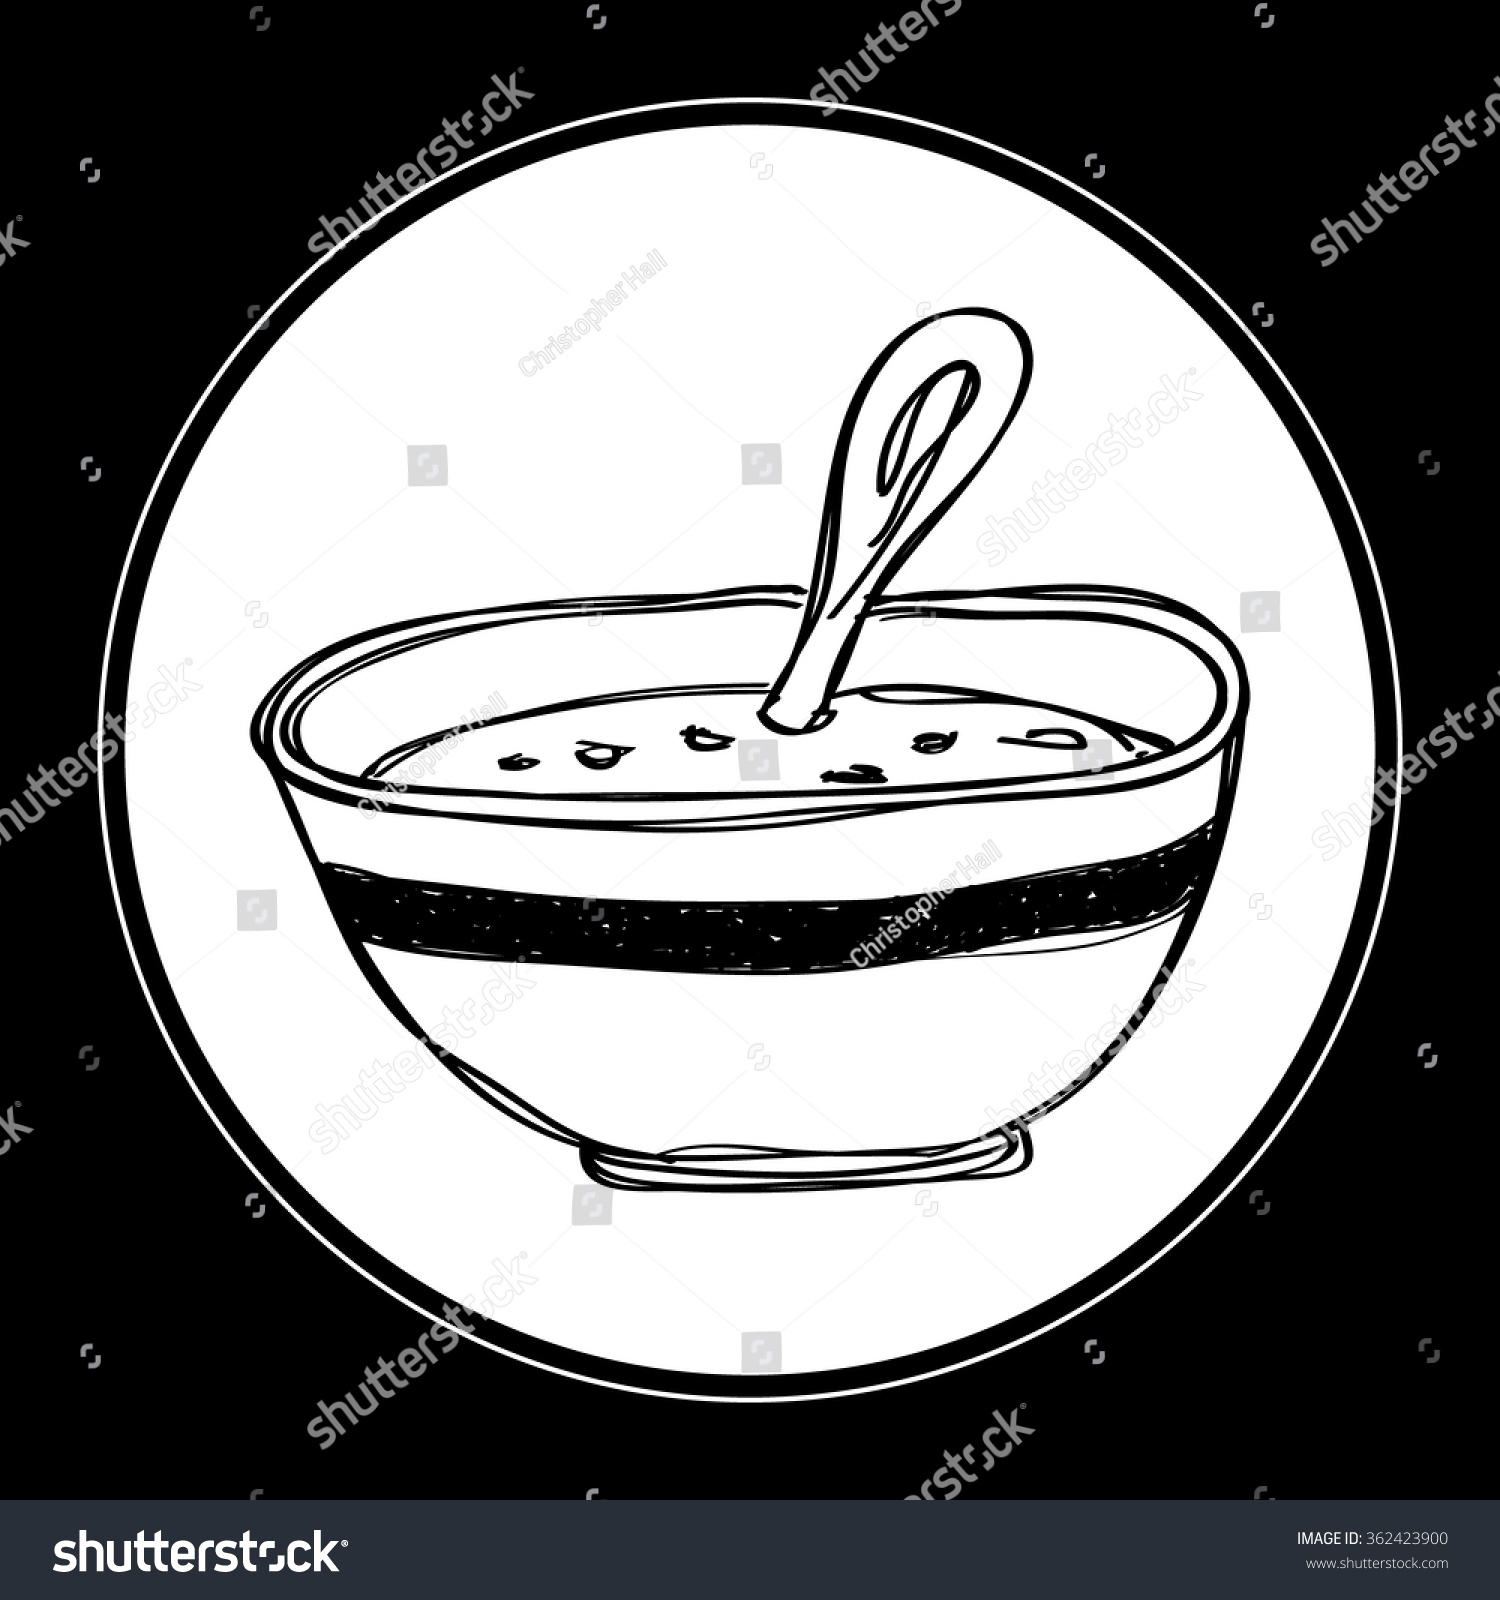 Simple Hand Drawn Doodle Bowl Soup Stock Vector (Royalty Free) 362423900